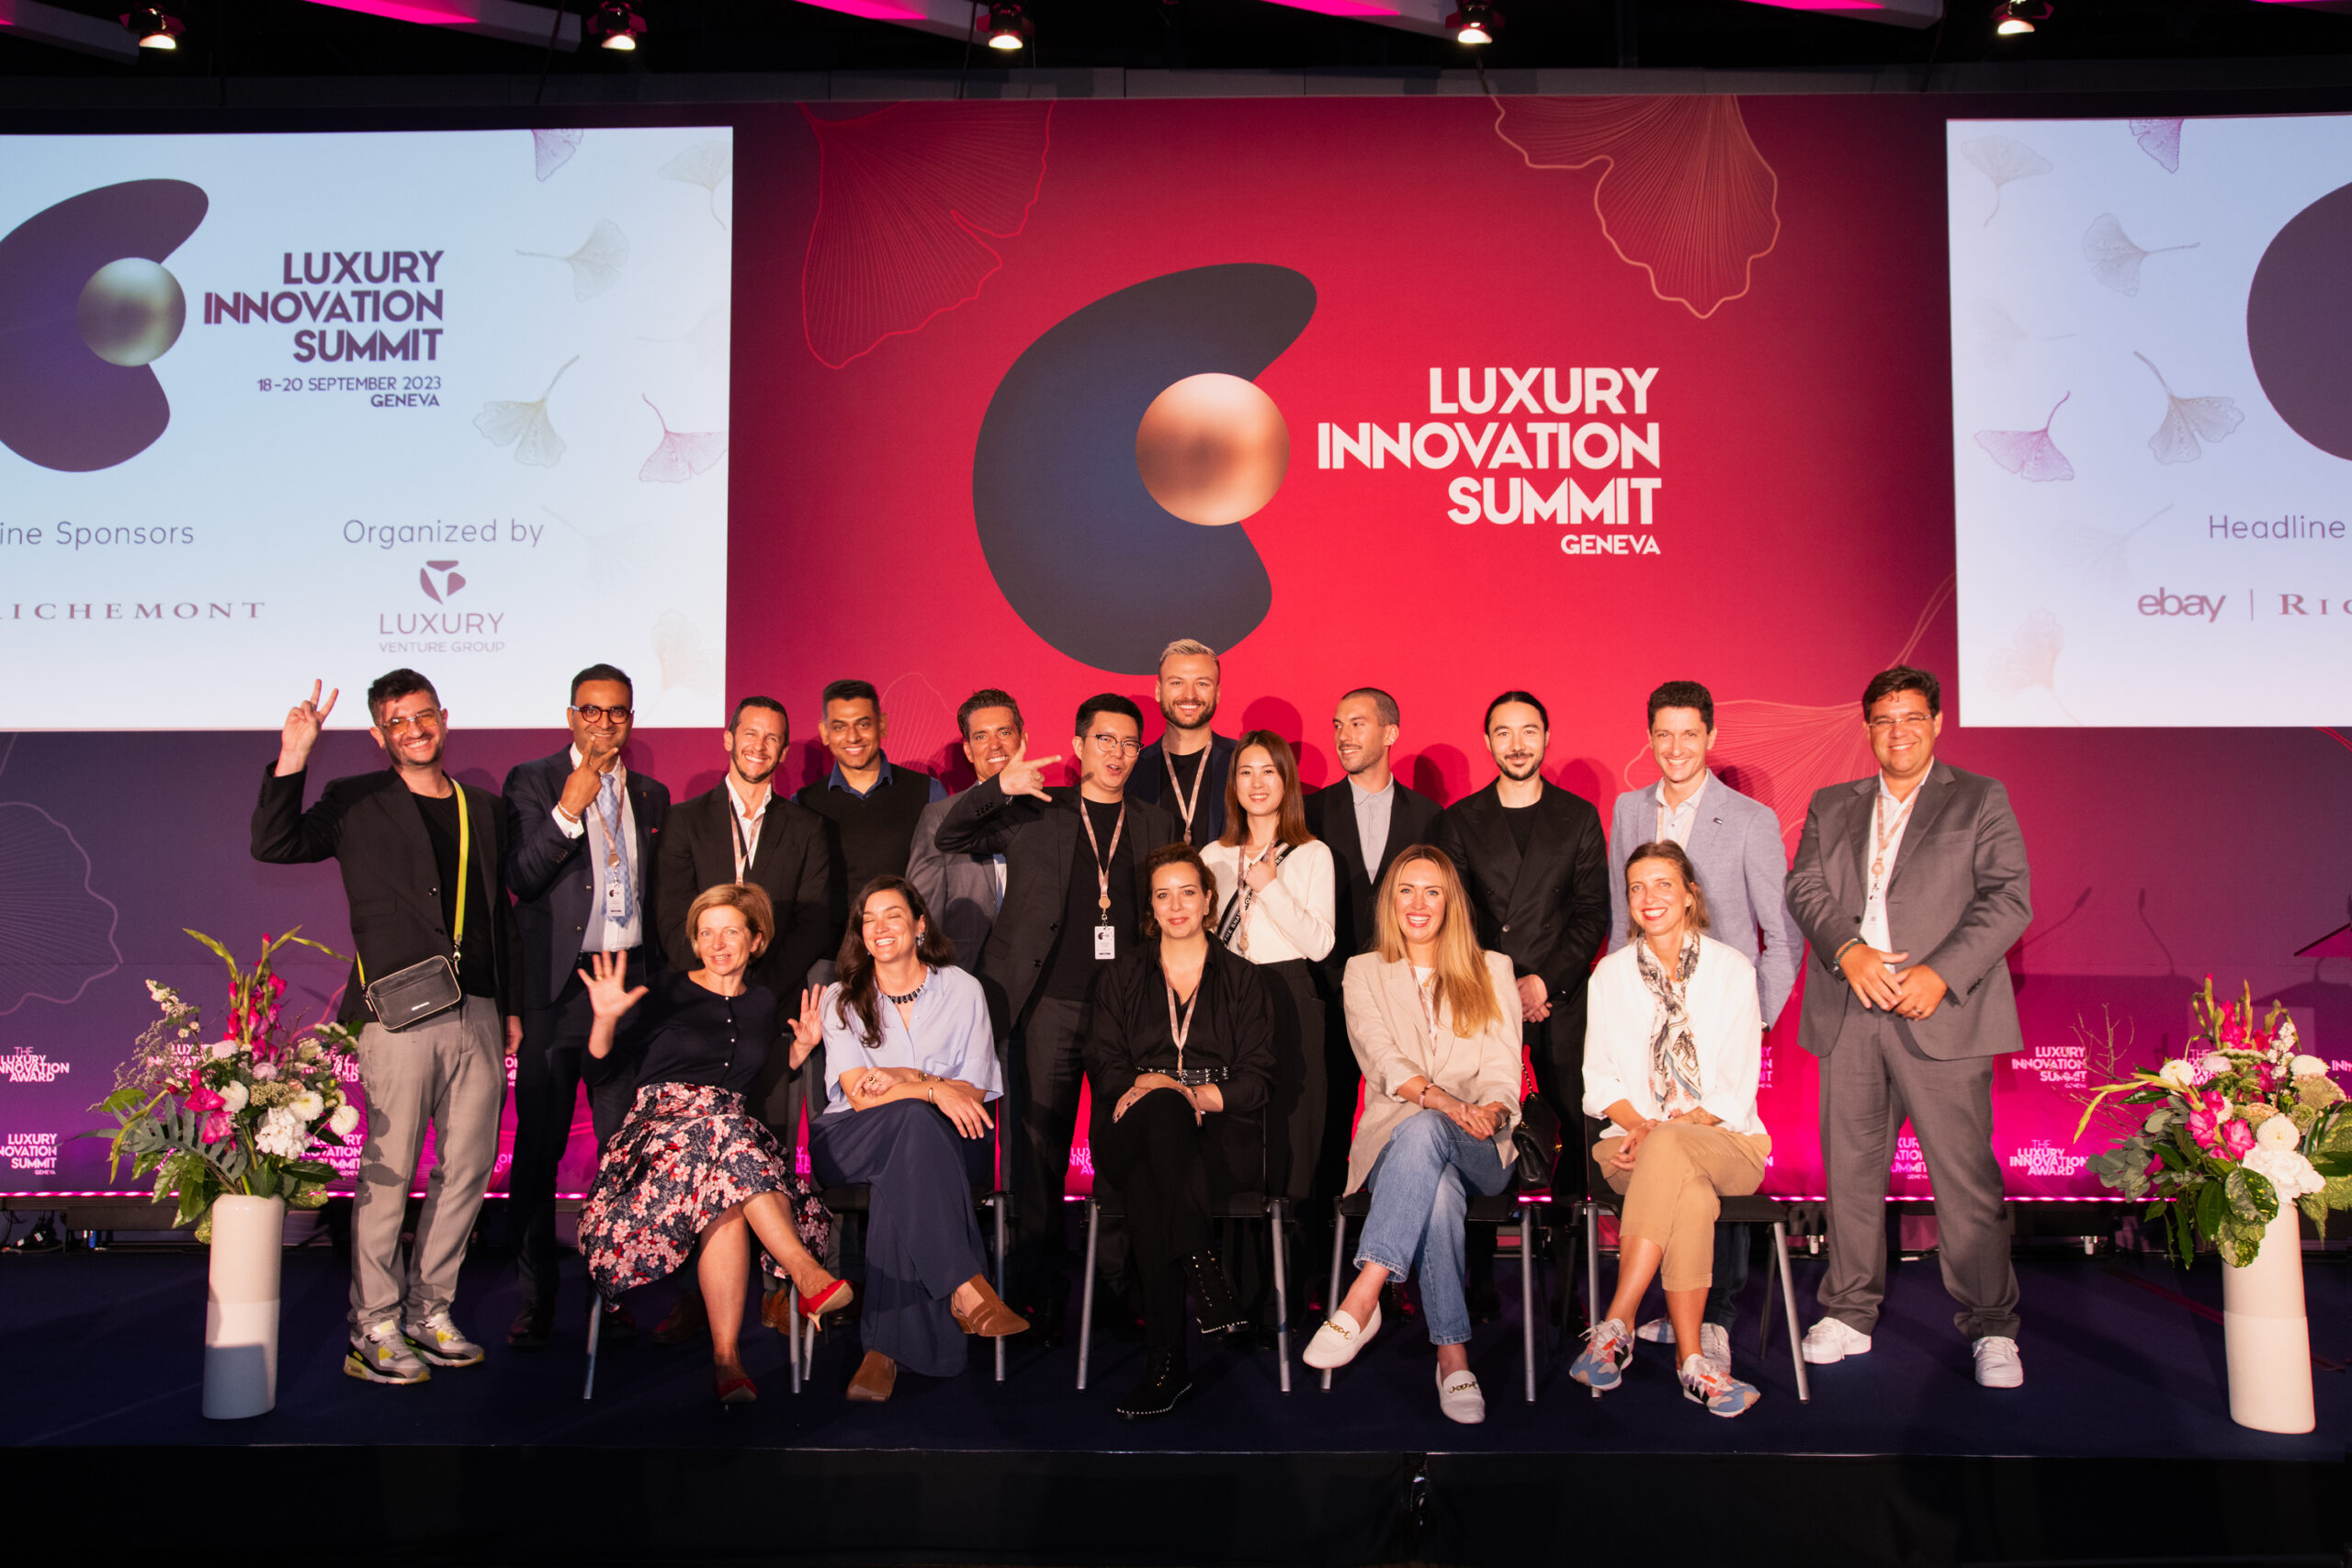 LVMH Innovation Awards 2022: The ShowCase wins in the